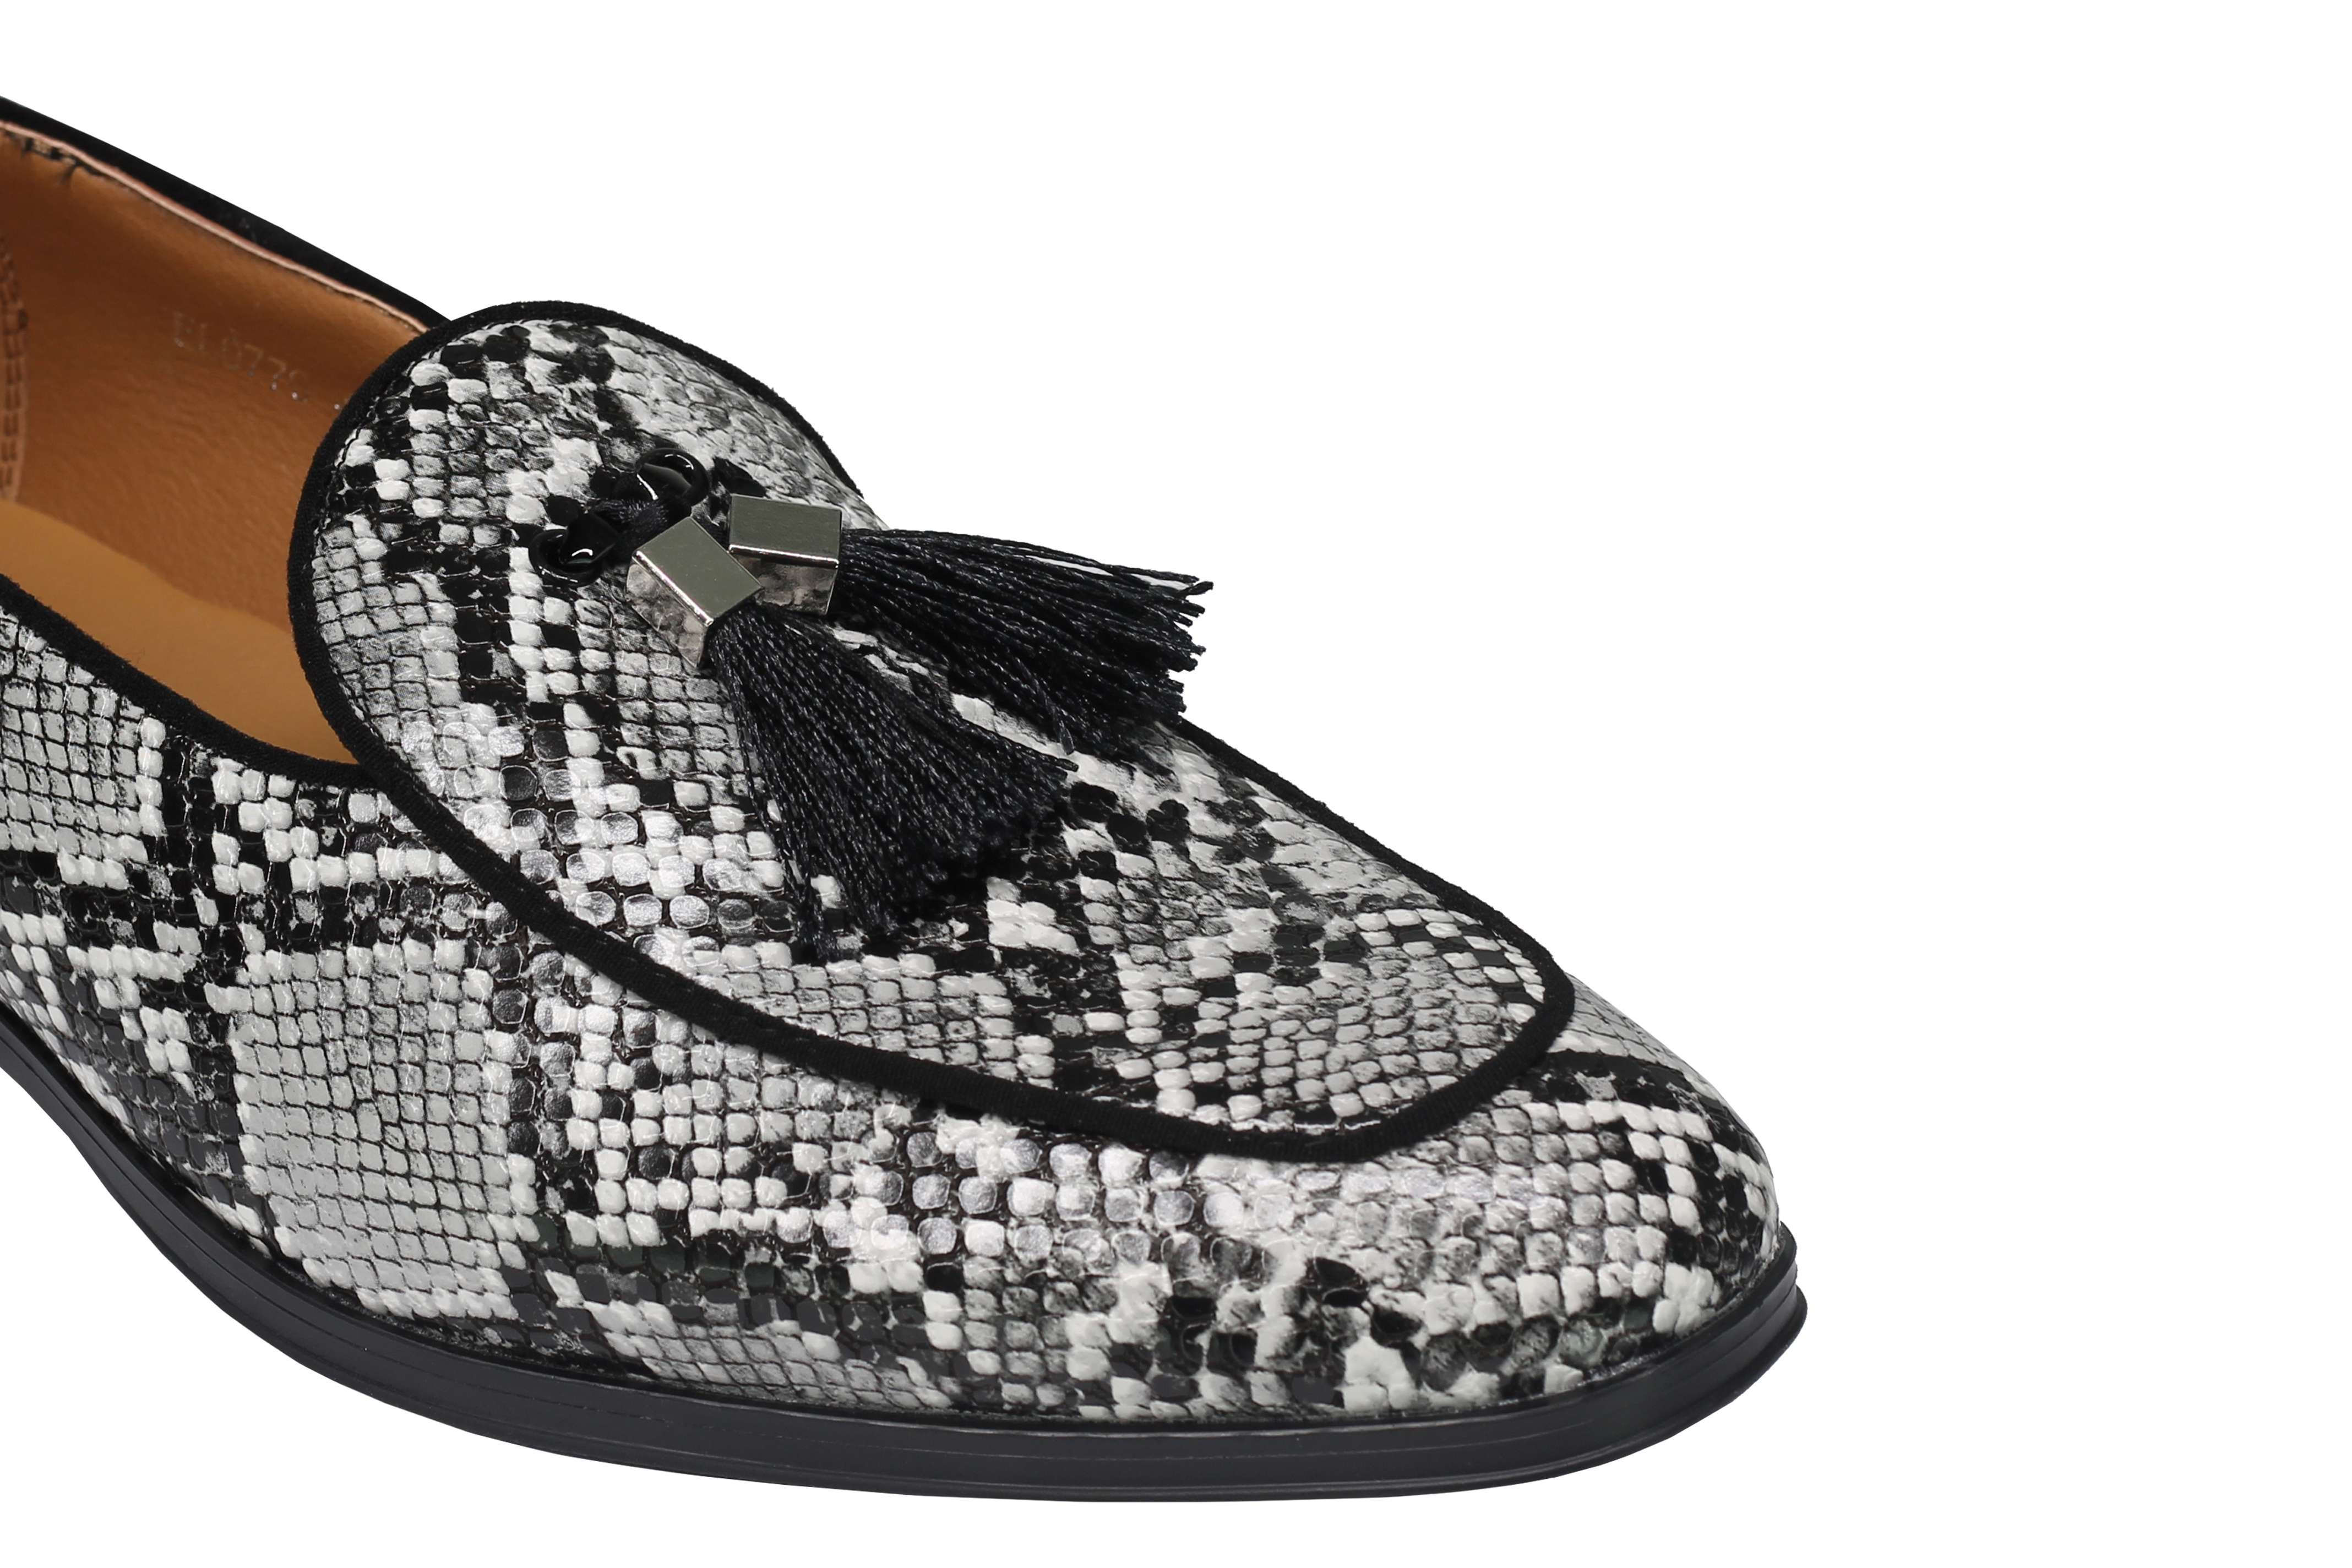 Printed Effect Tassel Loafers In Black White